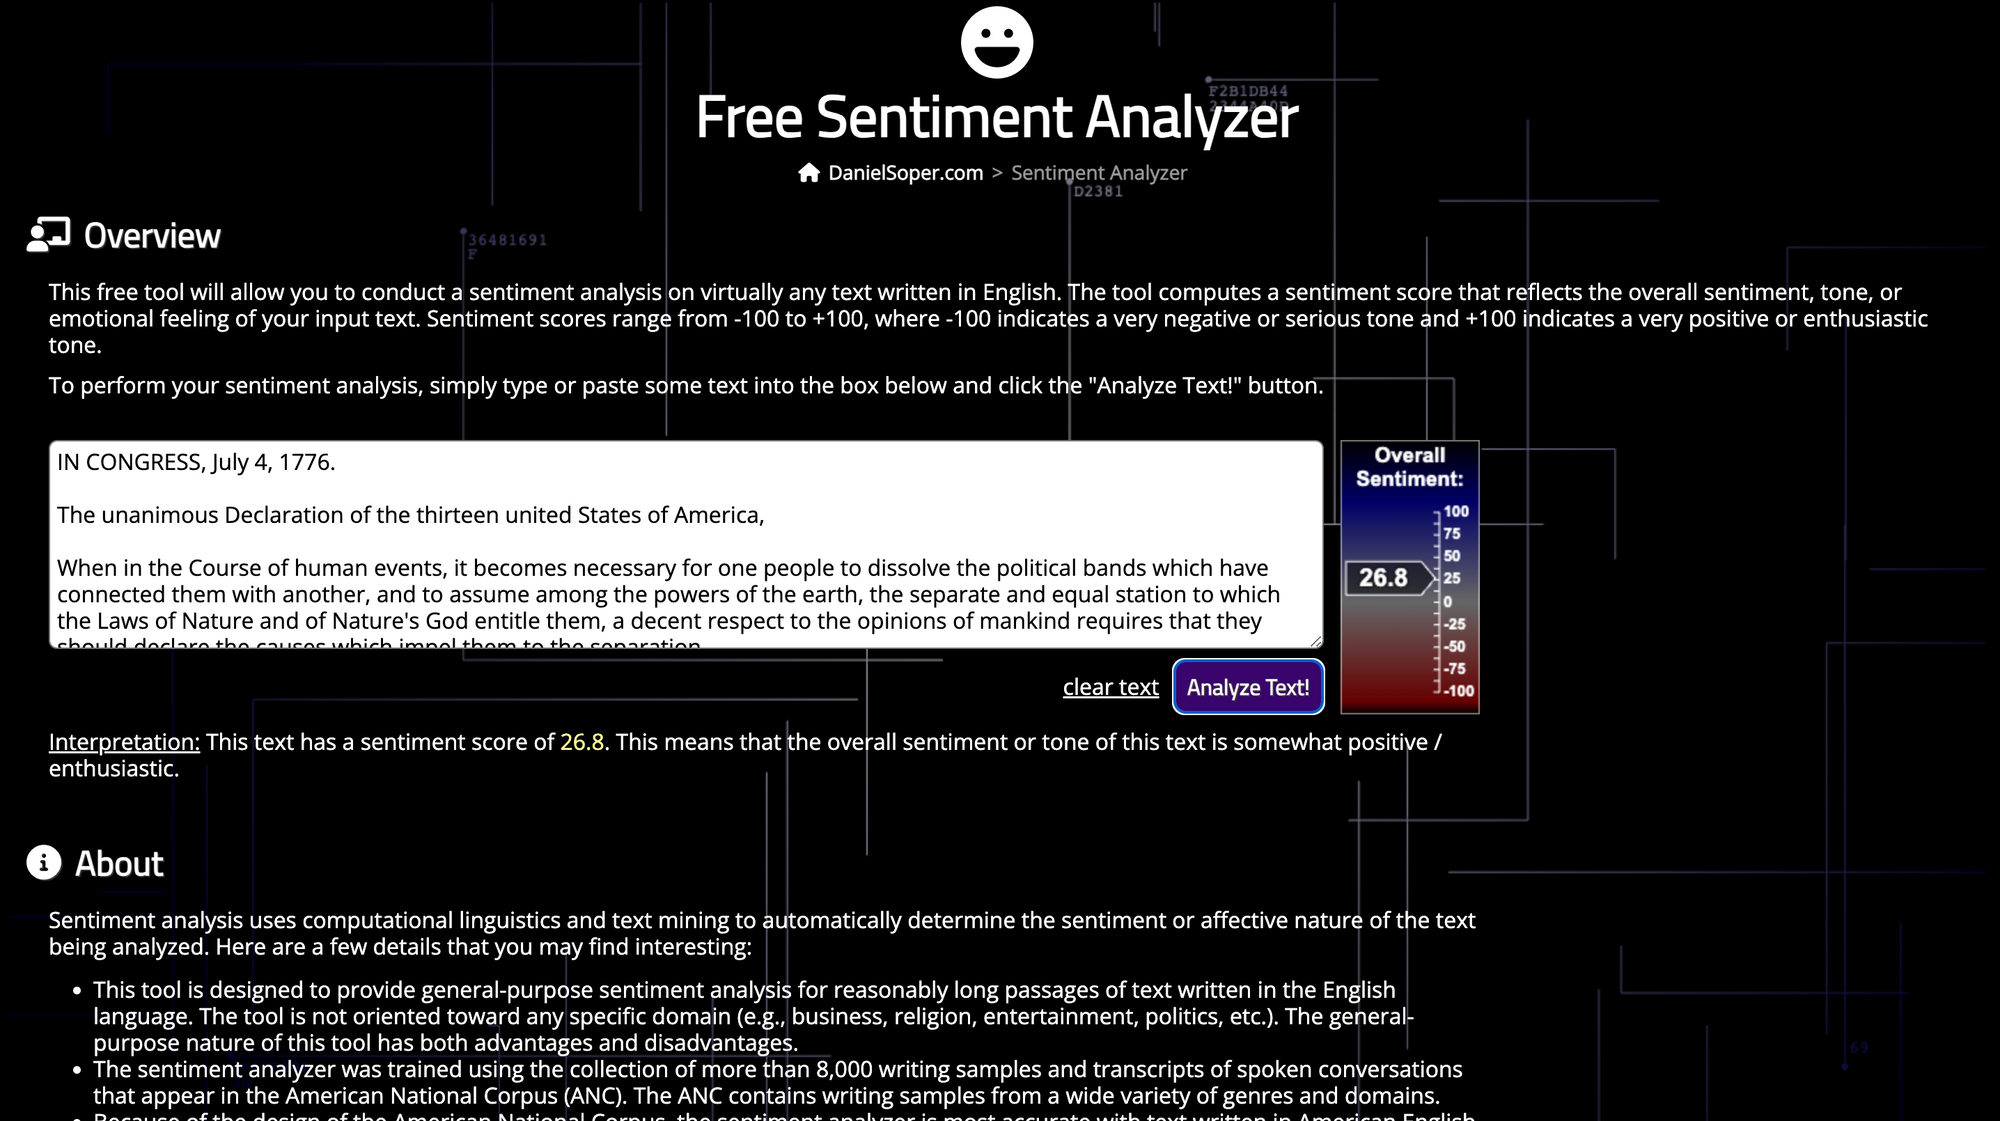 screenshot from the main page of sentiment analyzer